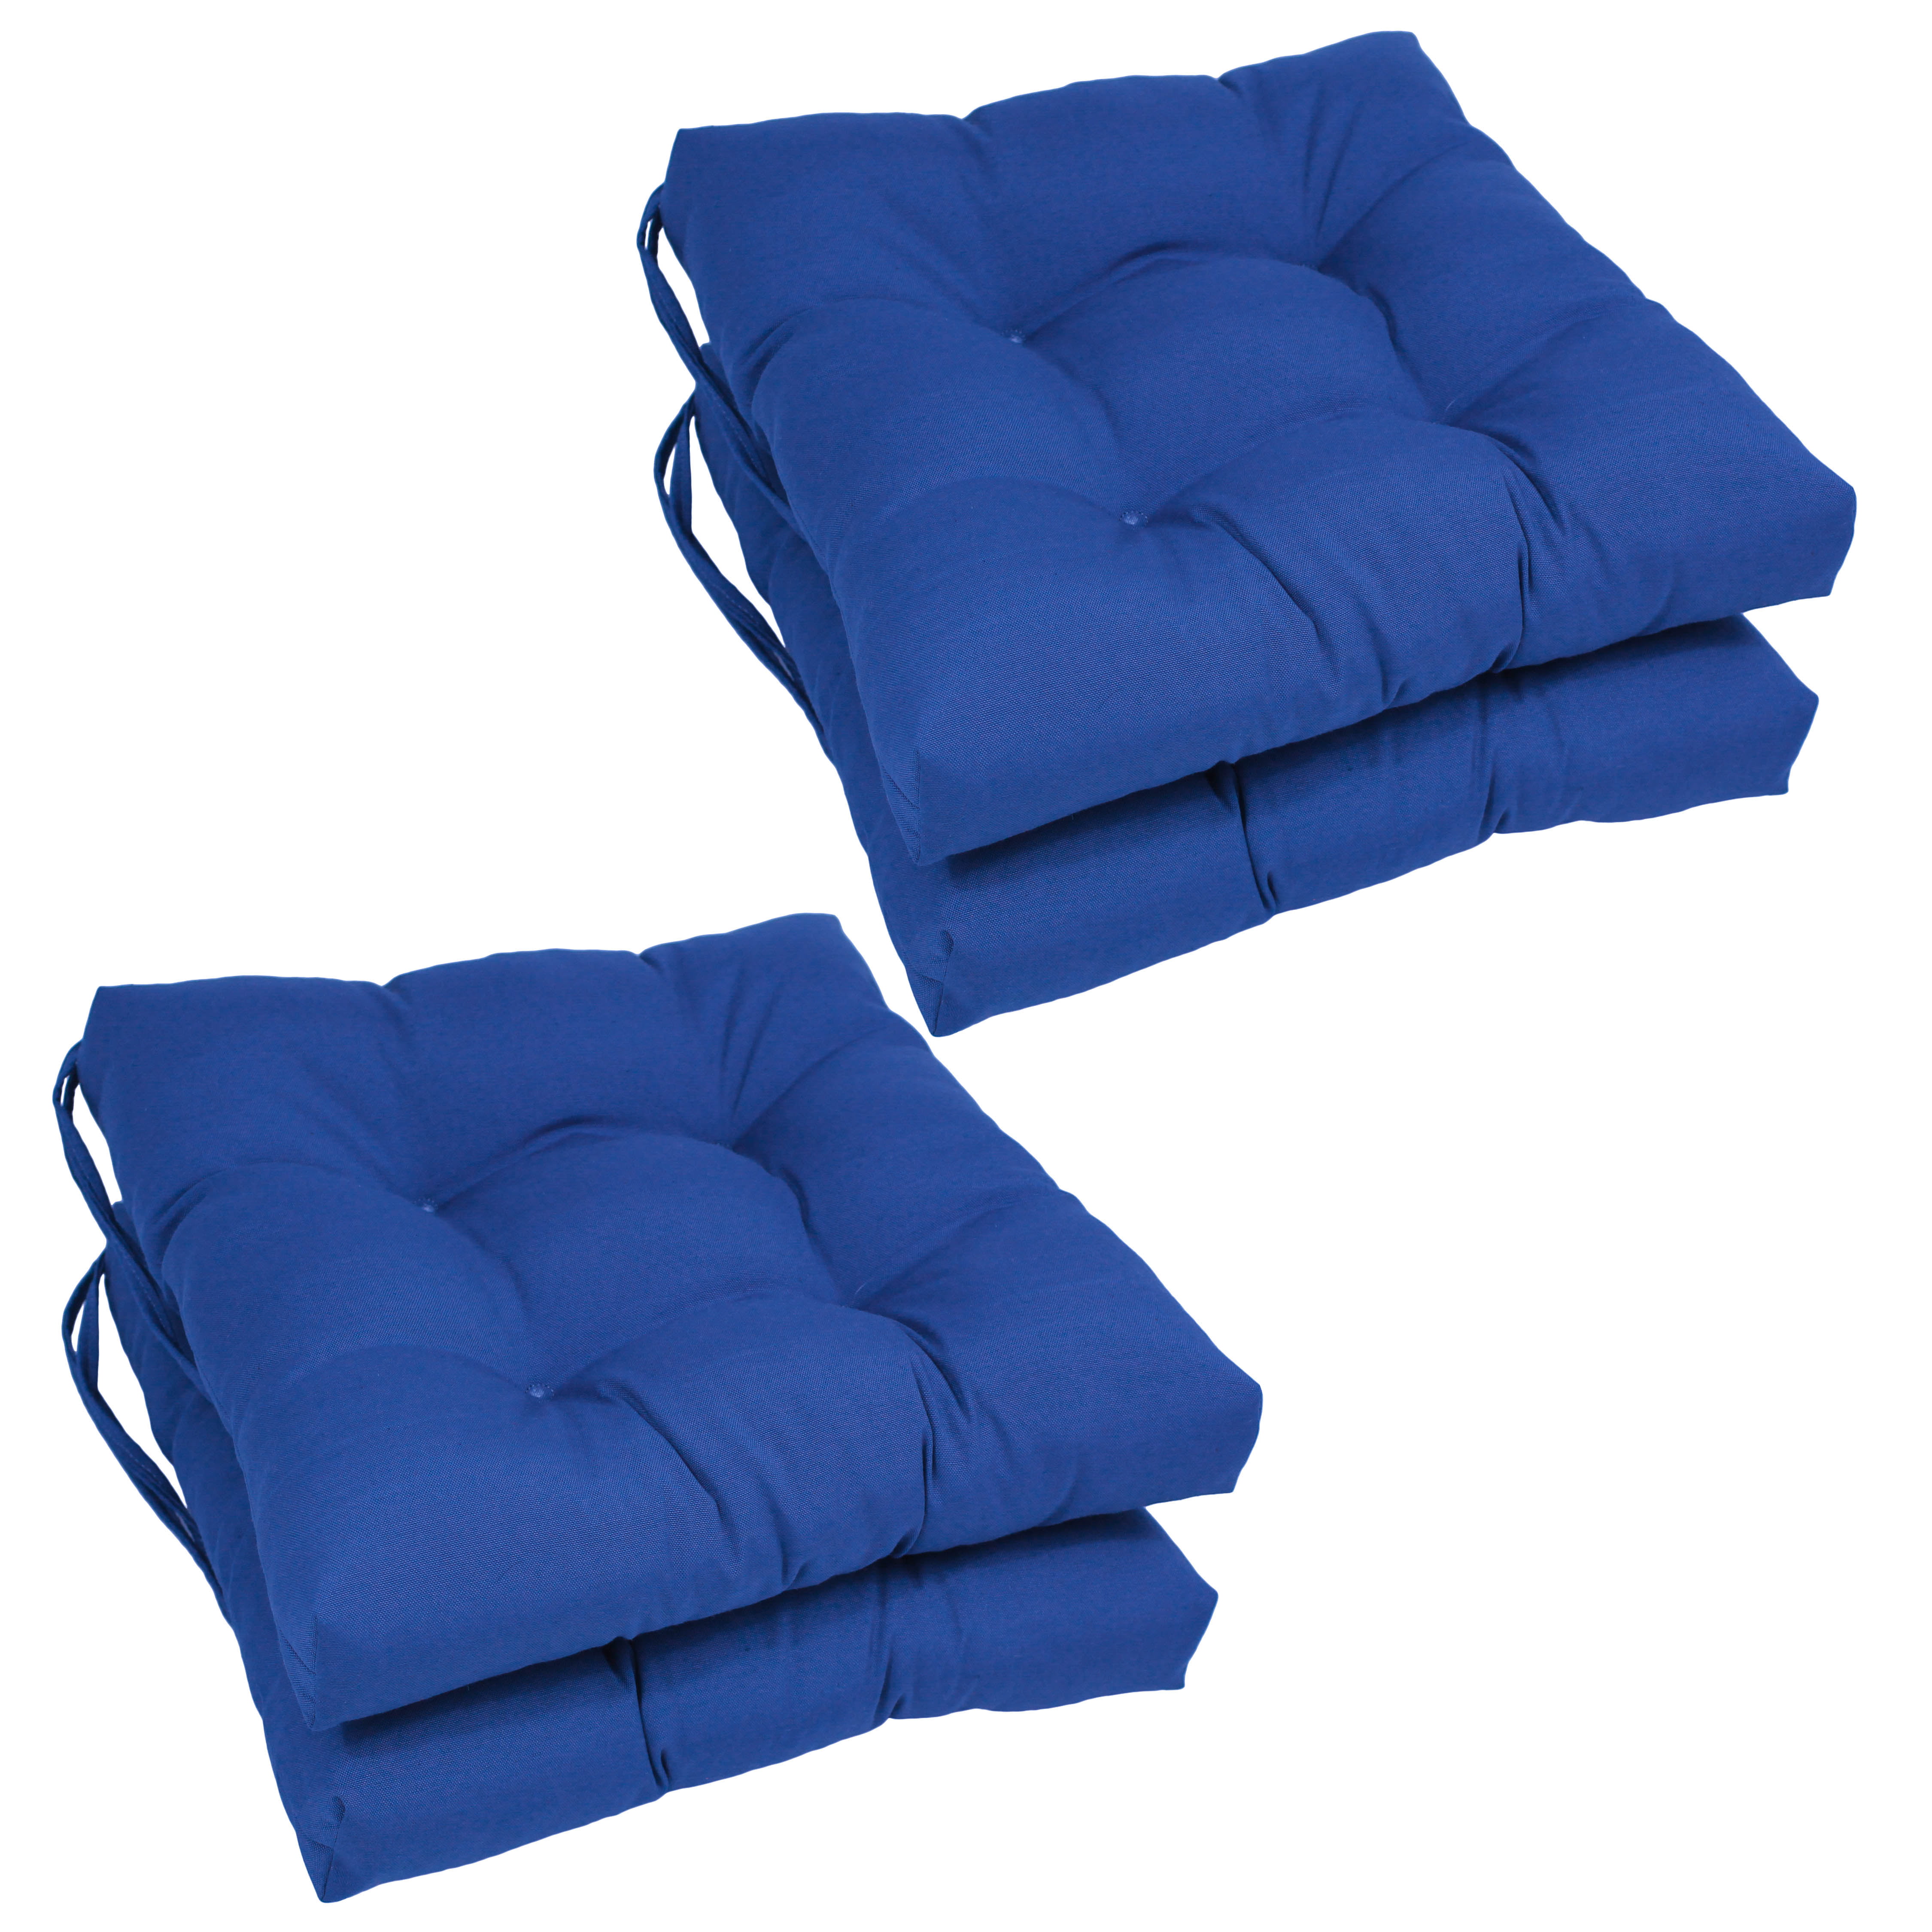 16-inch Solid Twill U-shaped Tufted Chair Cushions Set of 4 Navy 